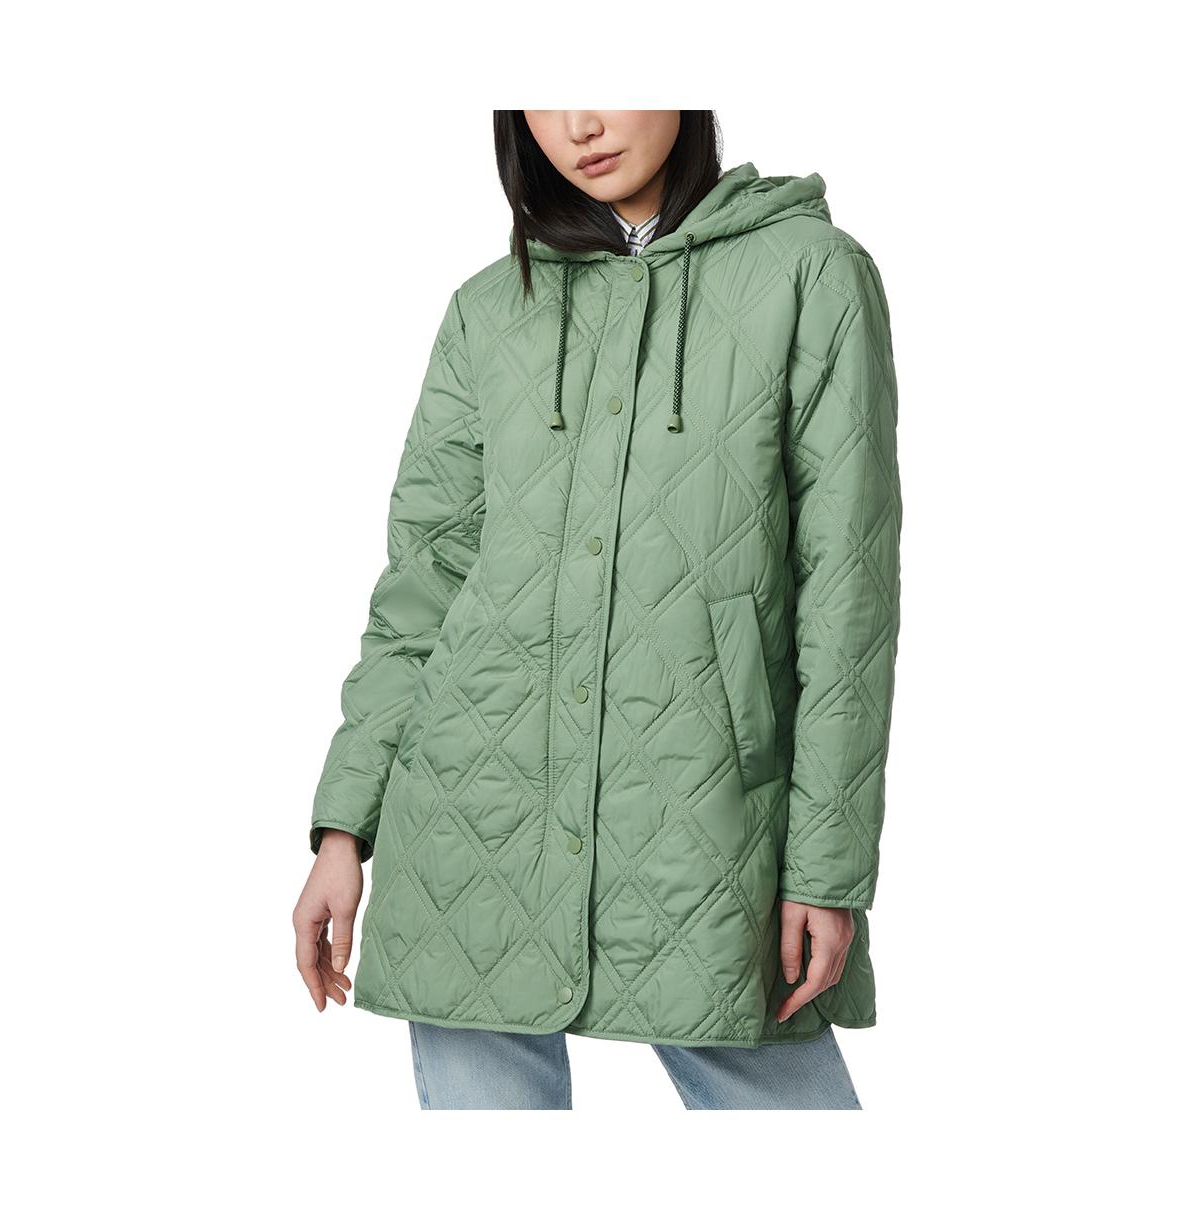 Women's Light Weight Quilted Jacket - Hedge green